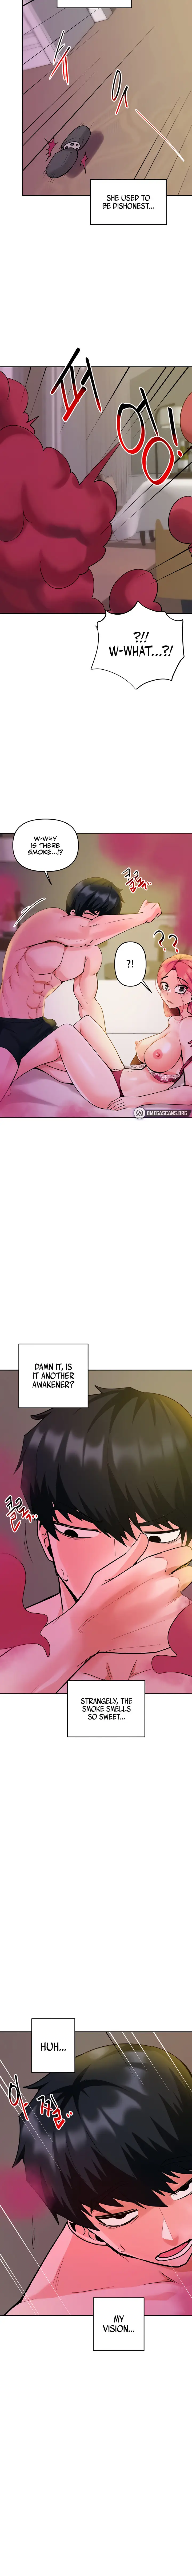 the-hypnosis-app-was-fake-chap-34-14